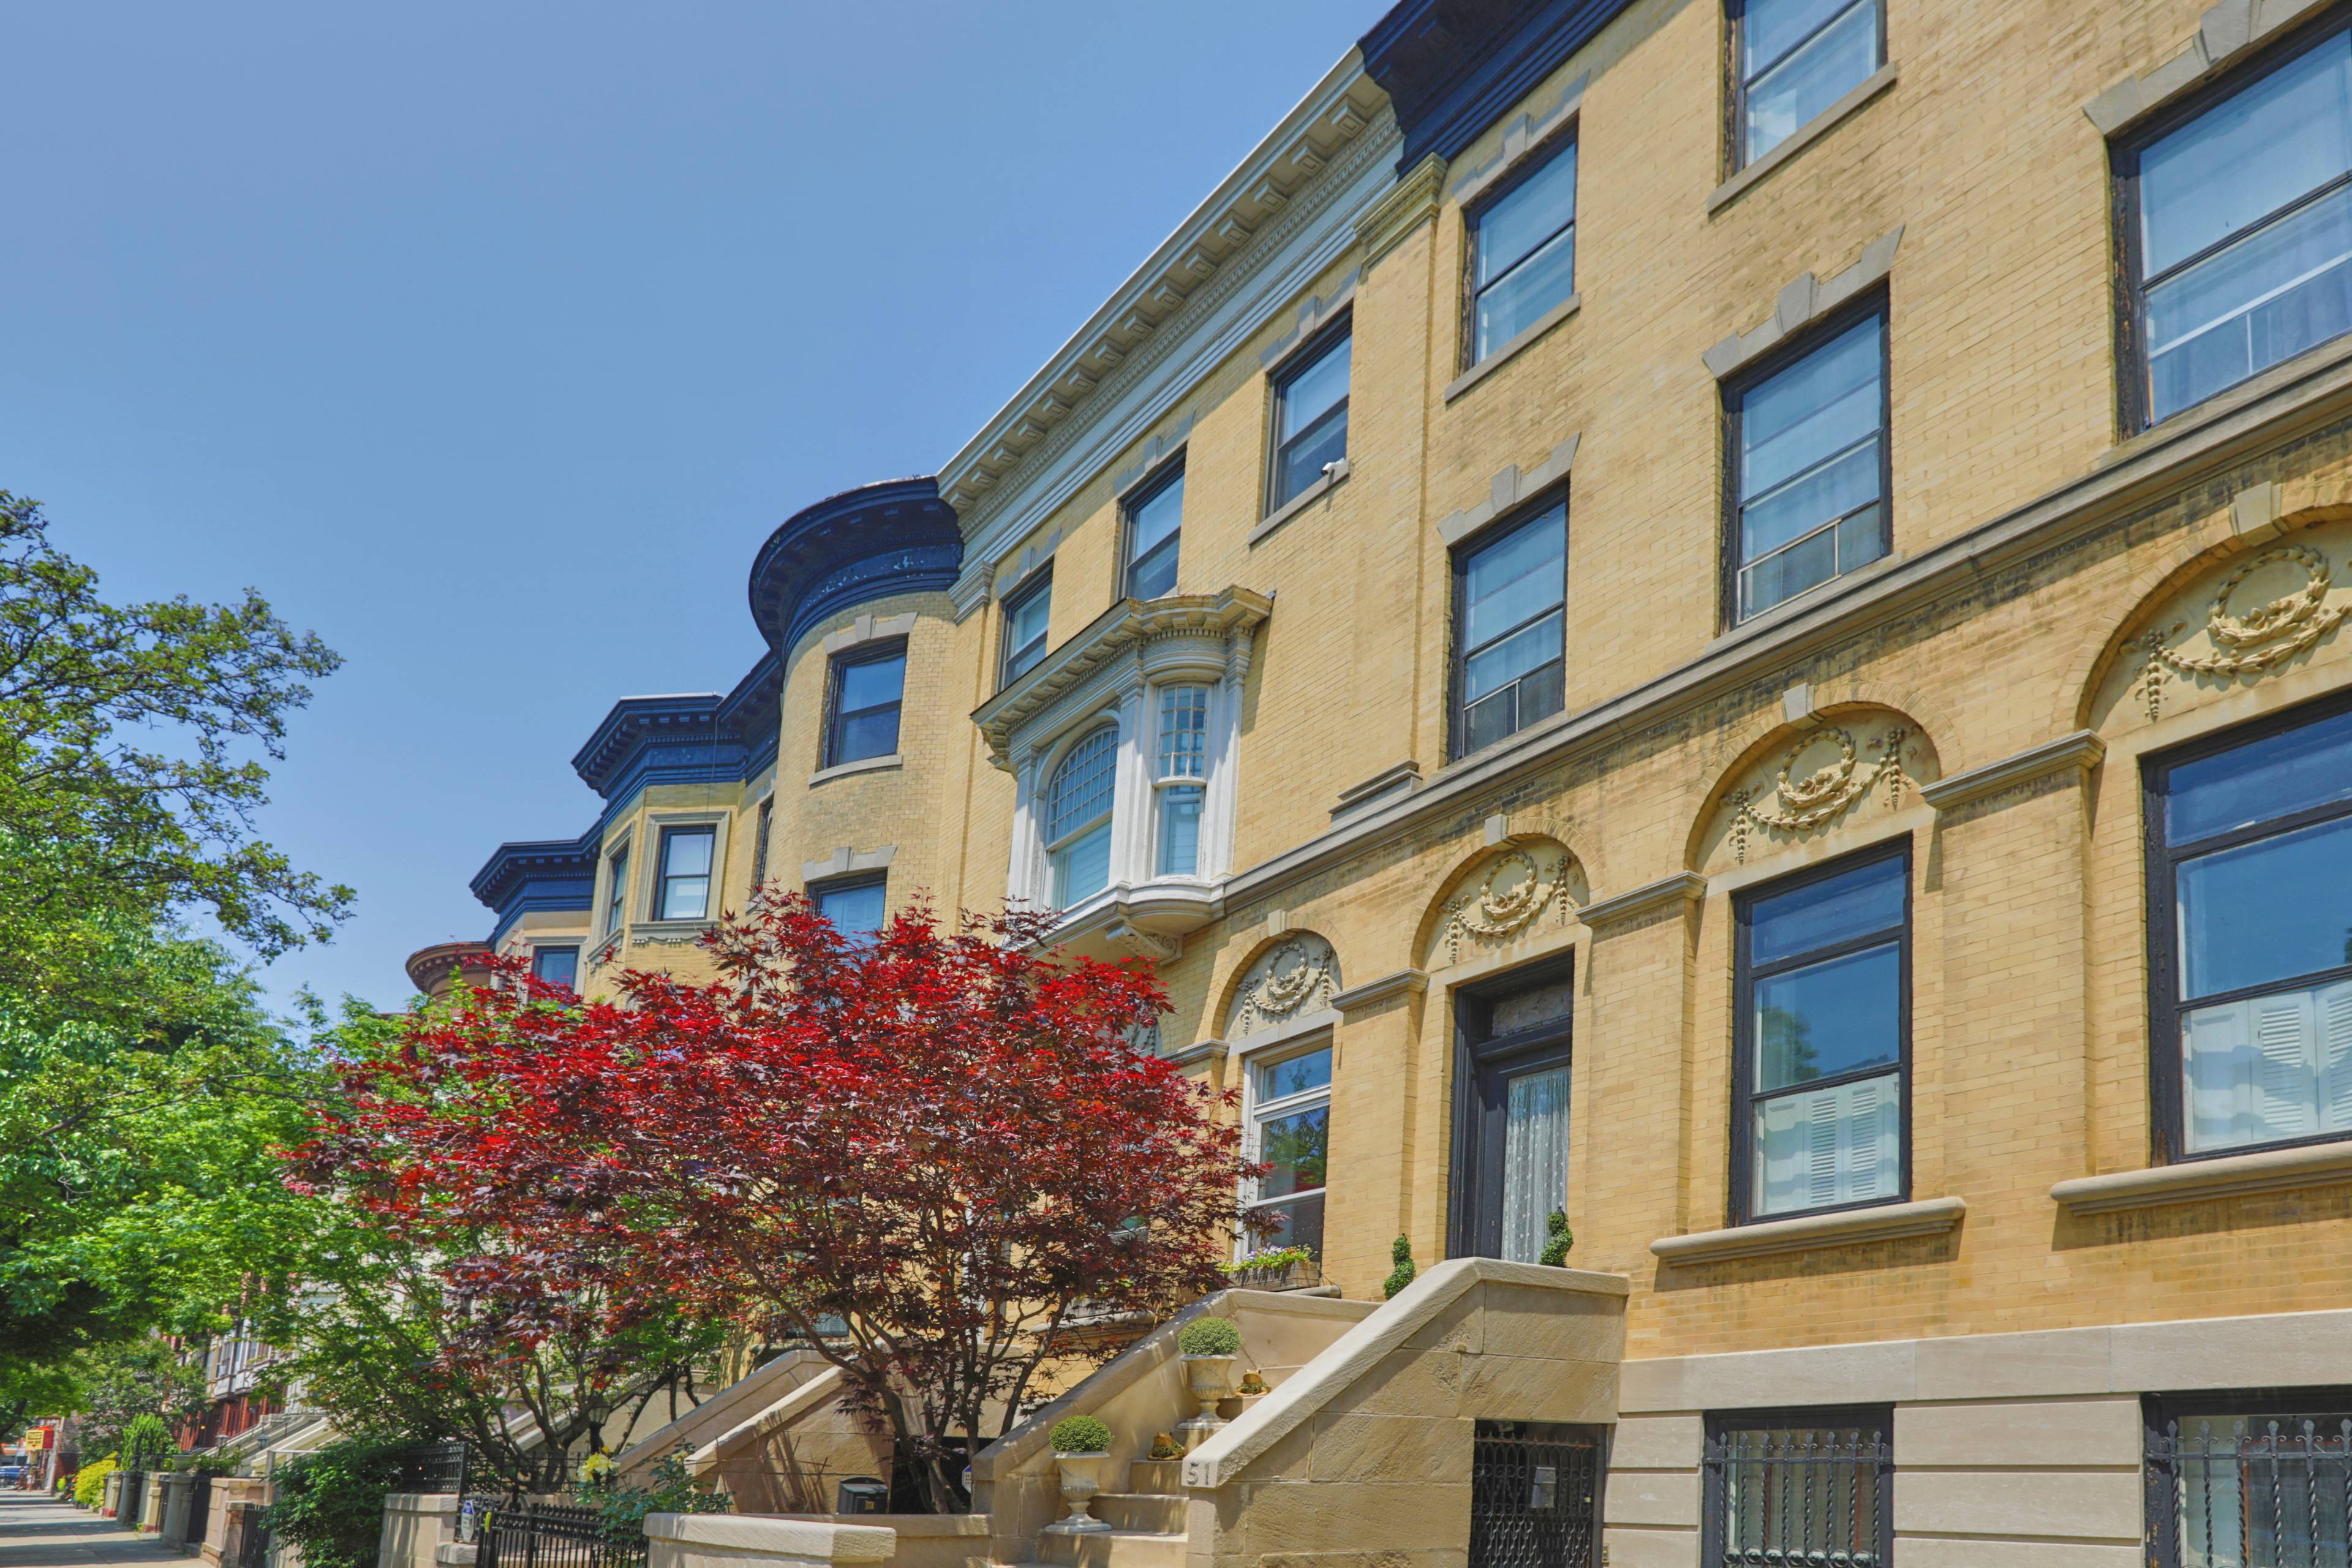 This beautiful four story Lefferts Manor limestone landmark townhouse is part of the Brooklyn historic district.